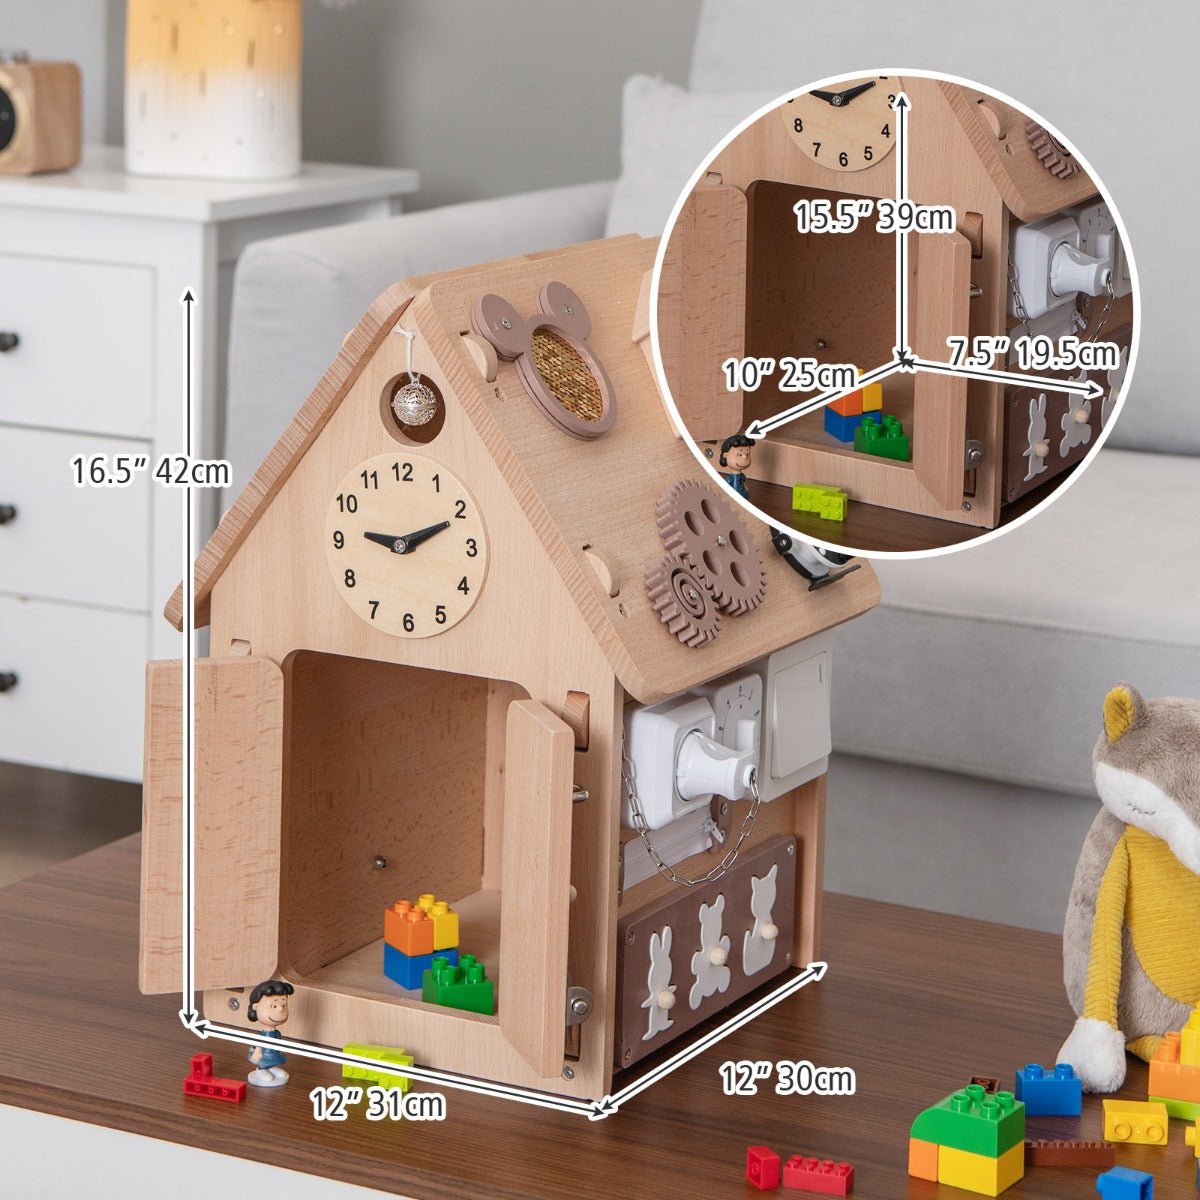 A World of Imagination in Our Busy House Playset